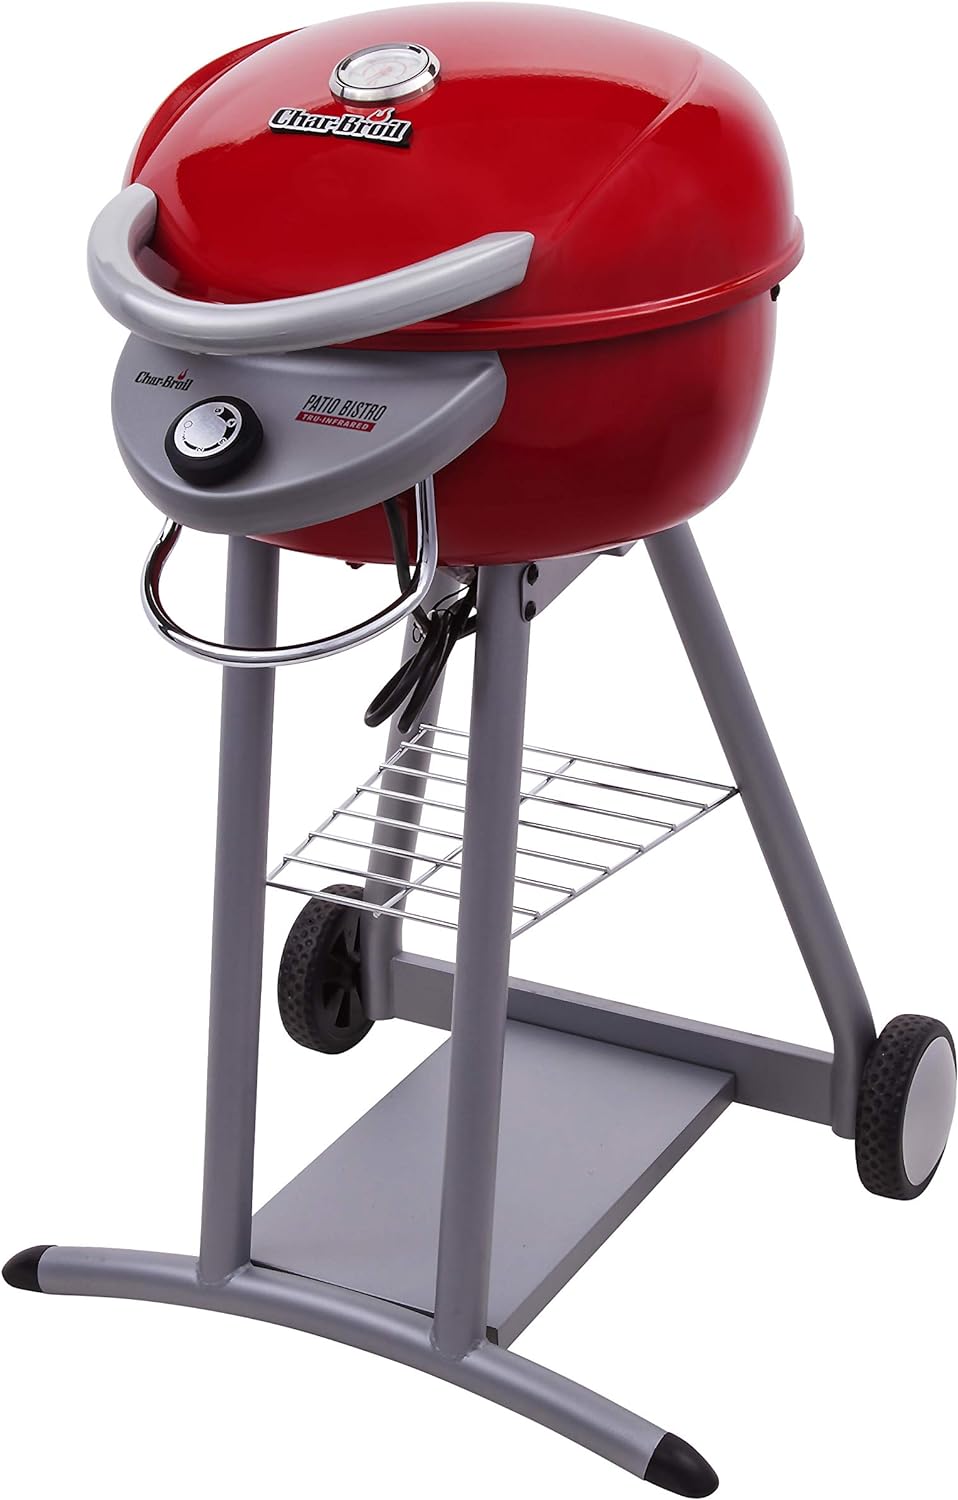 Char-Broil Patio Bistro TRU-Infrared Electric Grill Review